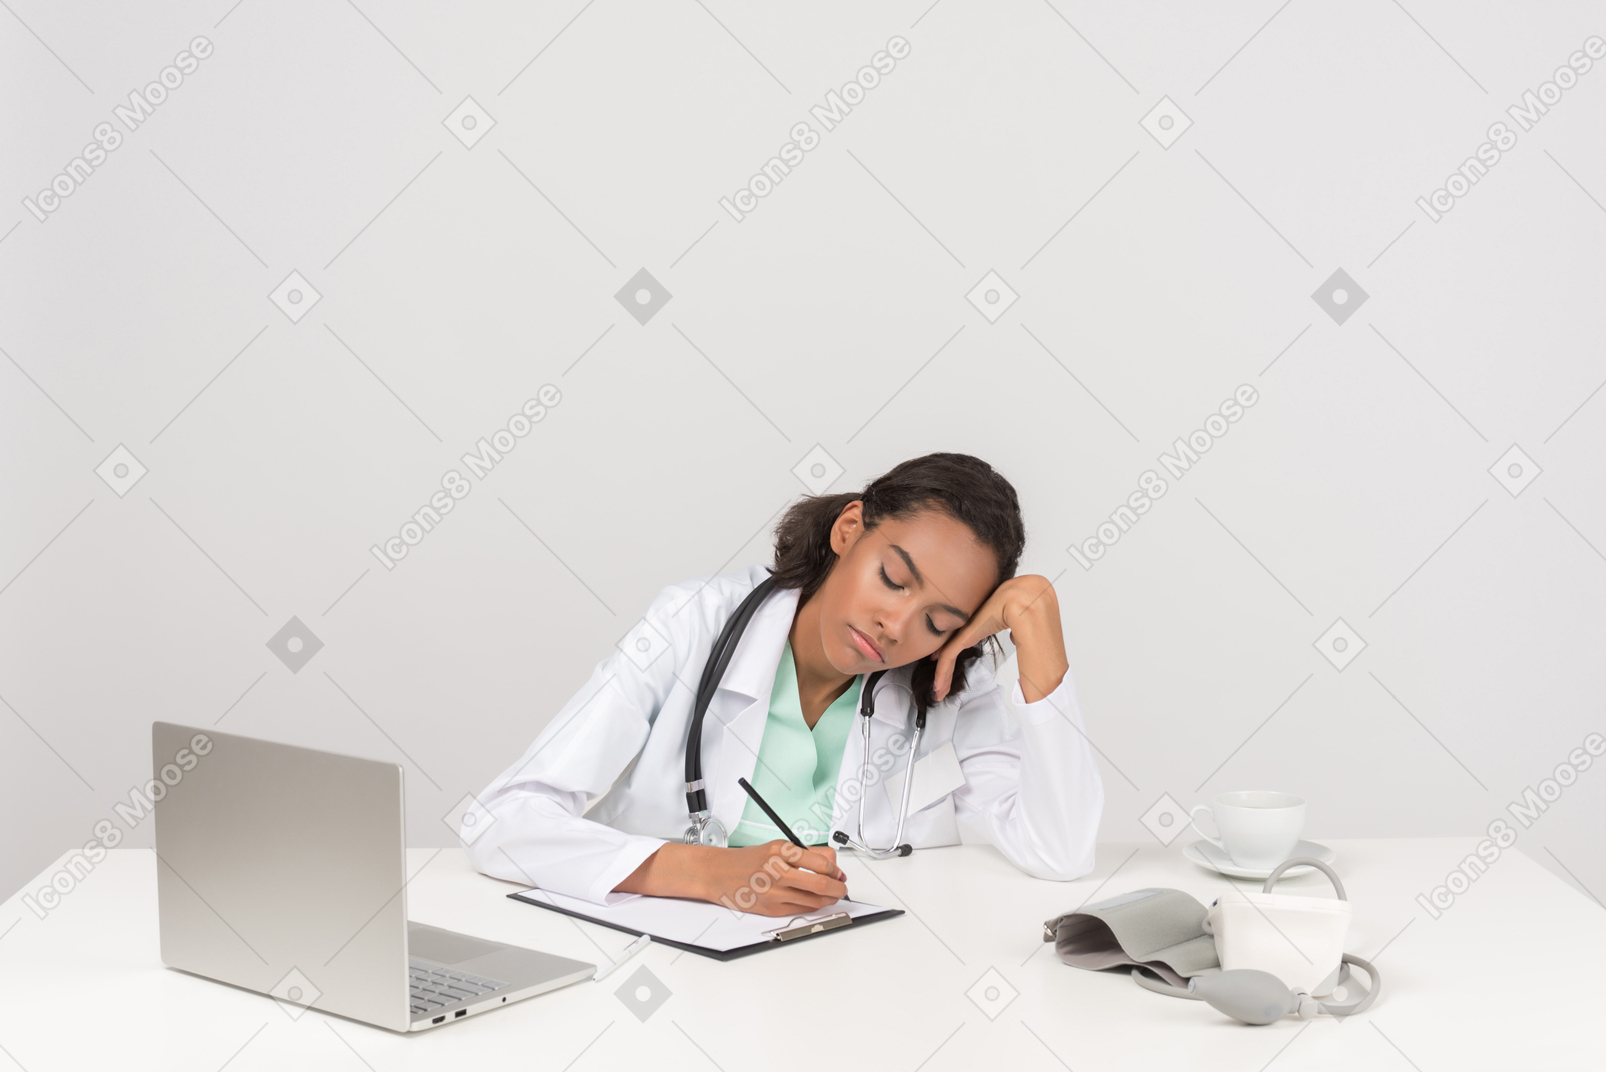 Female doctor tired and almost sleeping